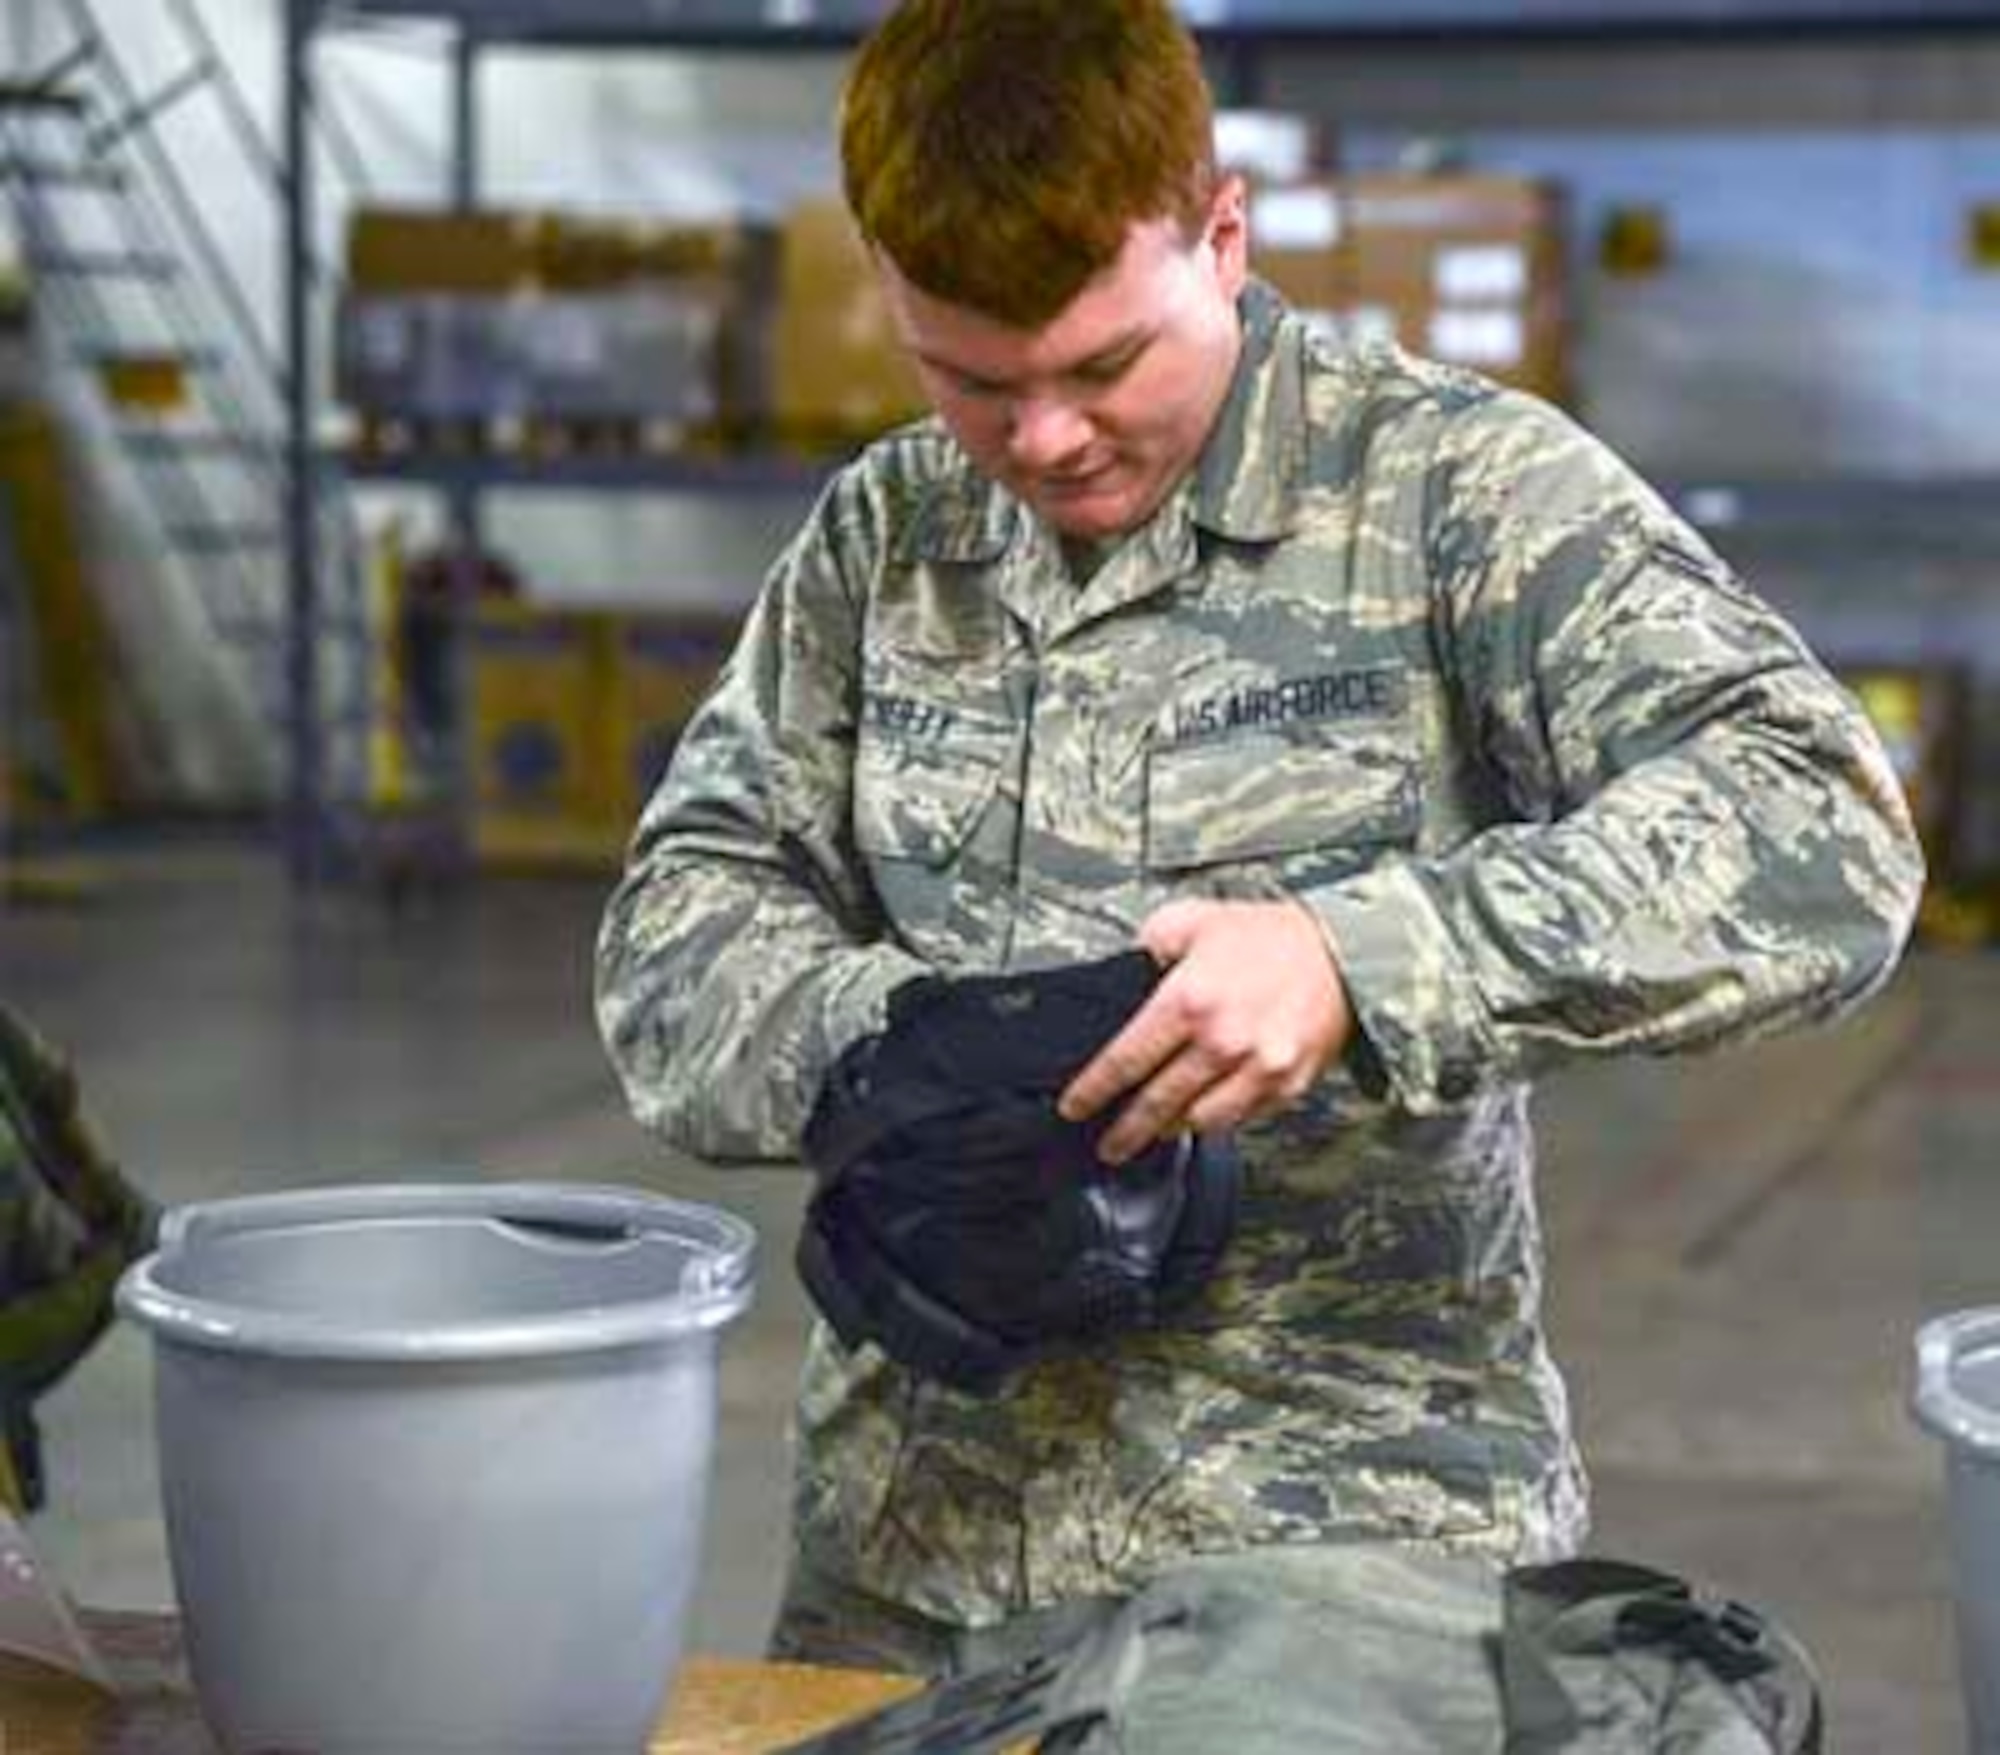 Airman First Class Cameron McNulty, a 189th Maintenance Group aircraft mechanic, cleans out his protective mask after completing CBRN training. During the training, Airmen practiced donning MOPP gear, being timed as they did so in order to replicate the amount of time they would have in the event of an attack. (U.S. Air National Guard photo by Tech. Sgt. Jessica Condit)